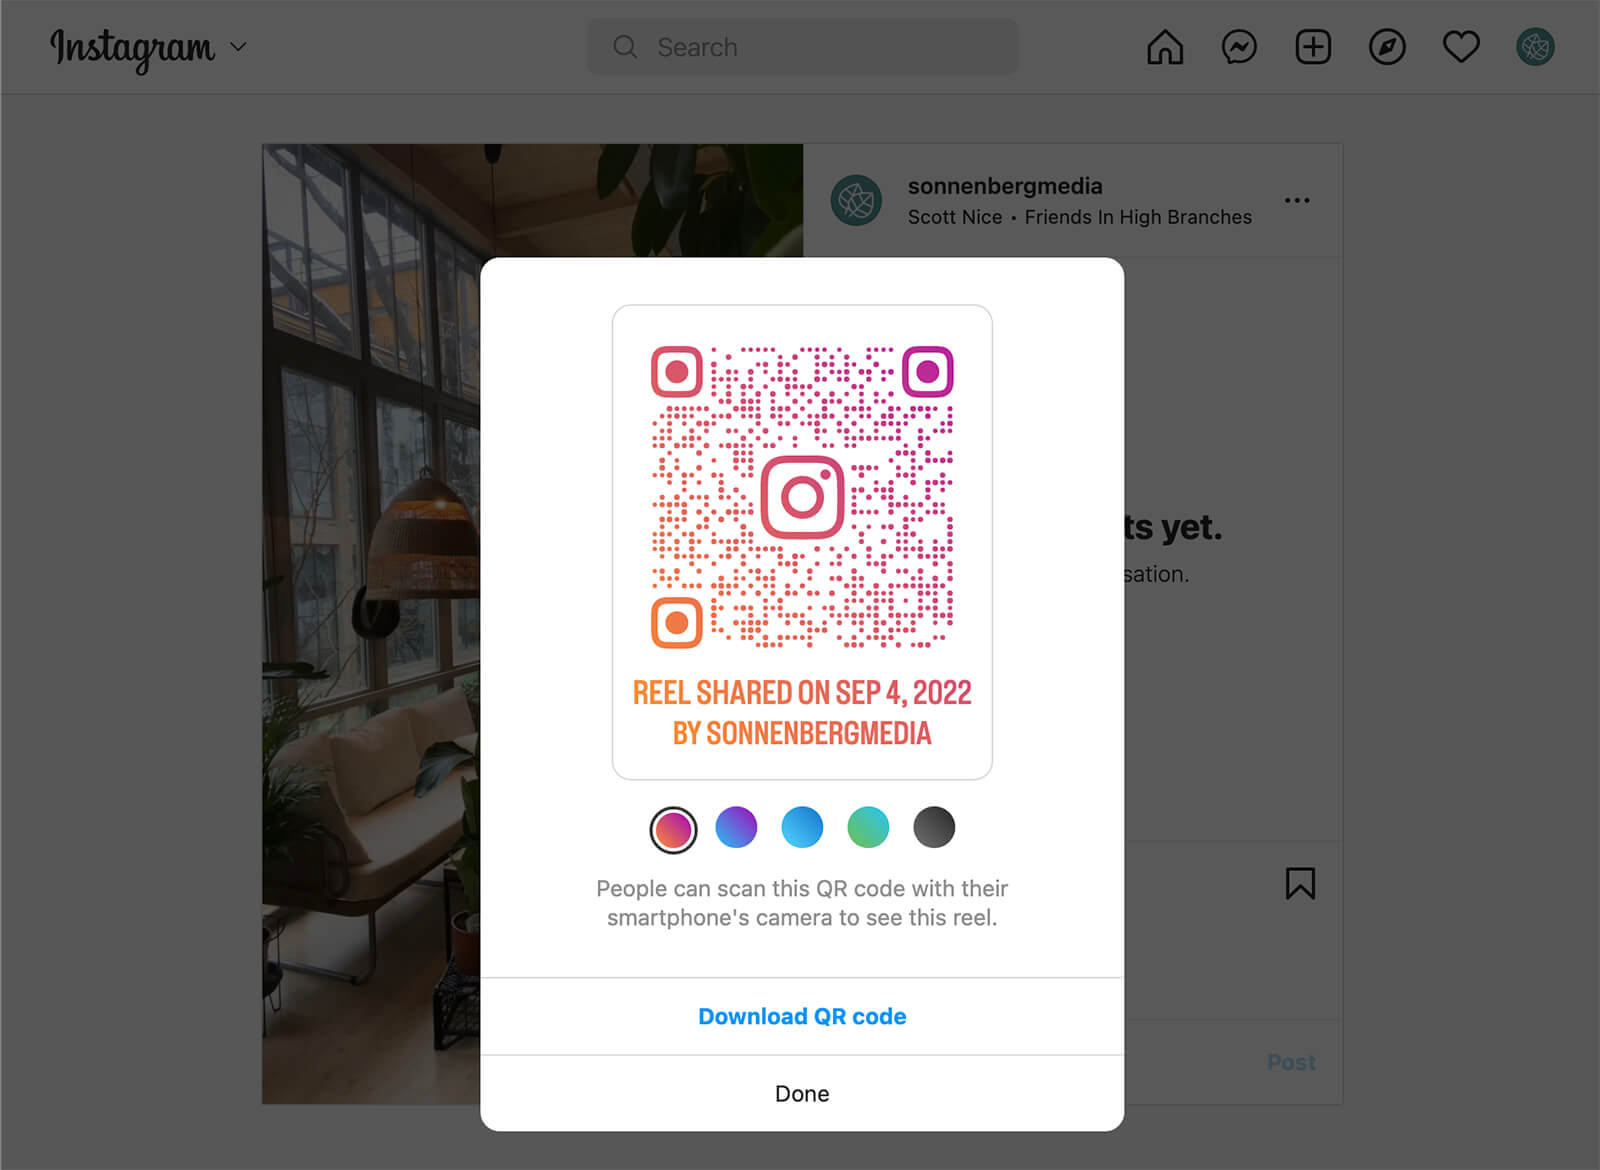 how-to-create-an-instagram-qr-code-to-share-reels-desktop-browser-sonnenbergmedia-example-4